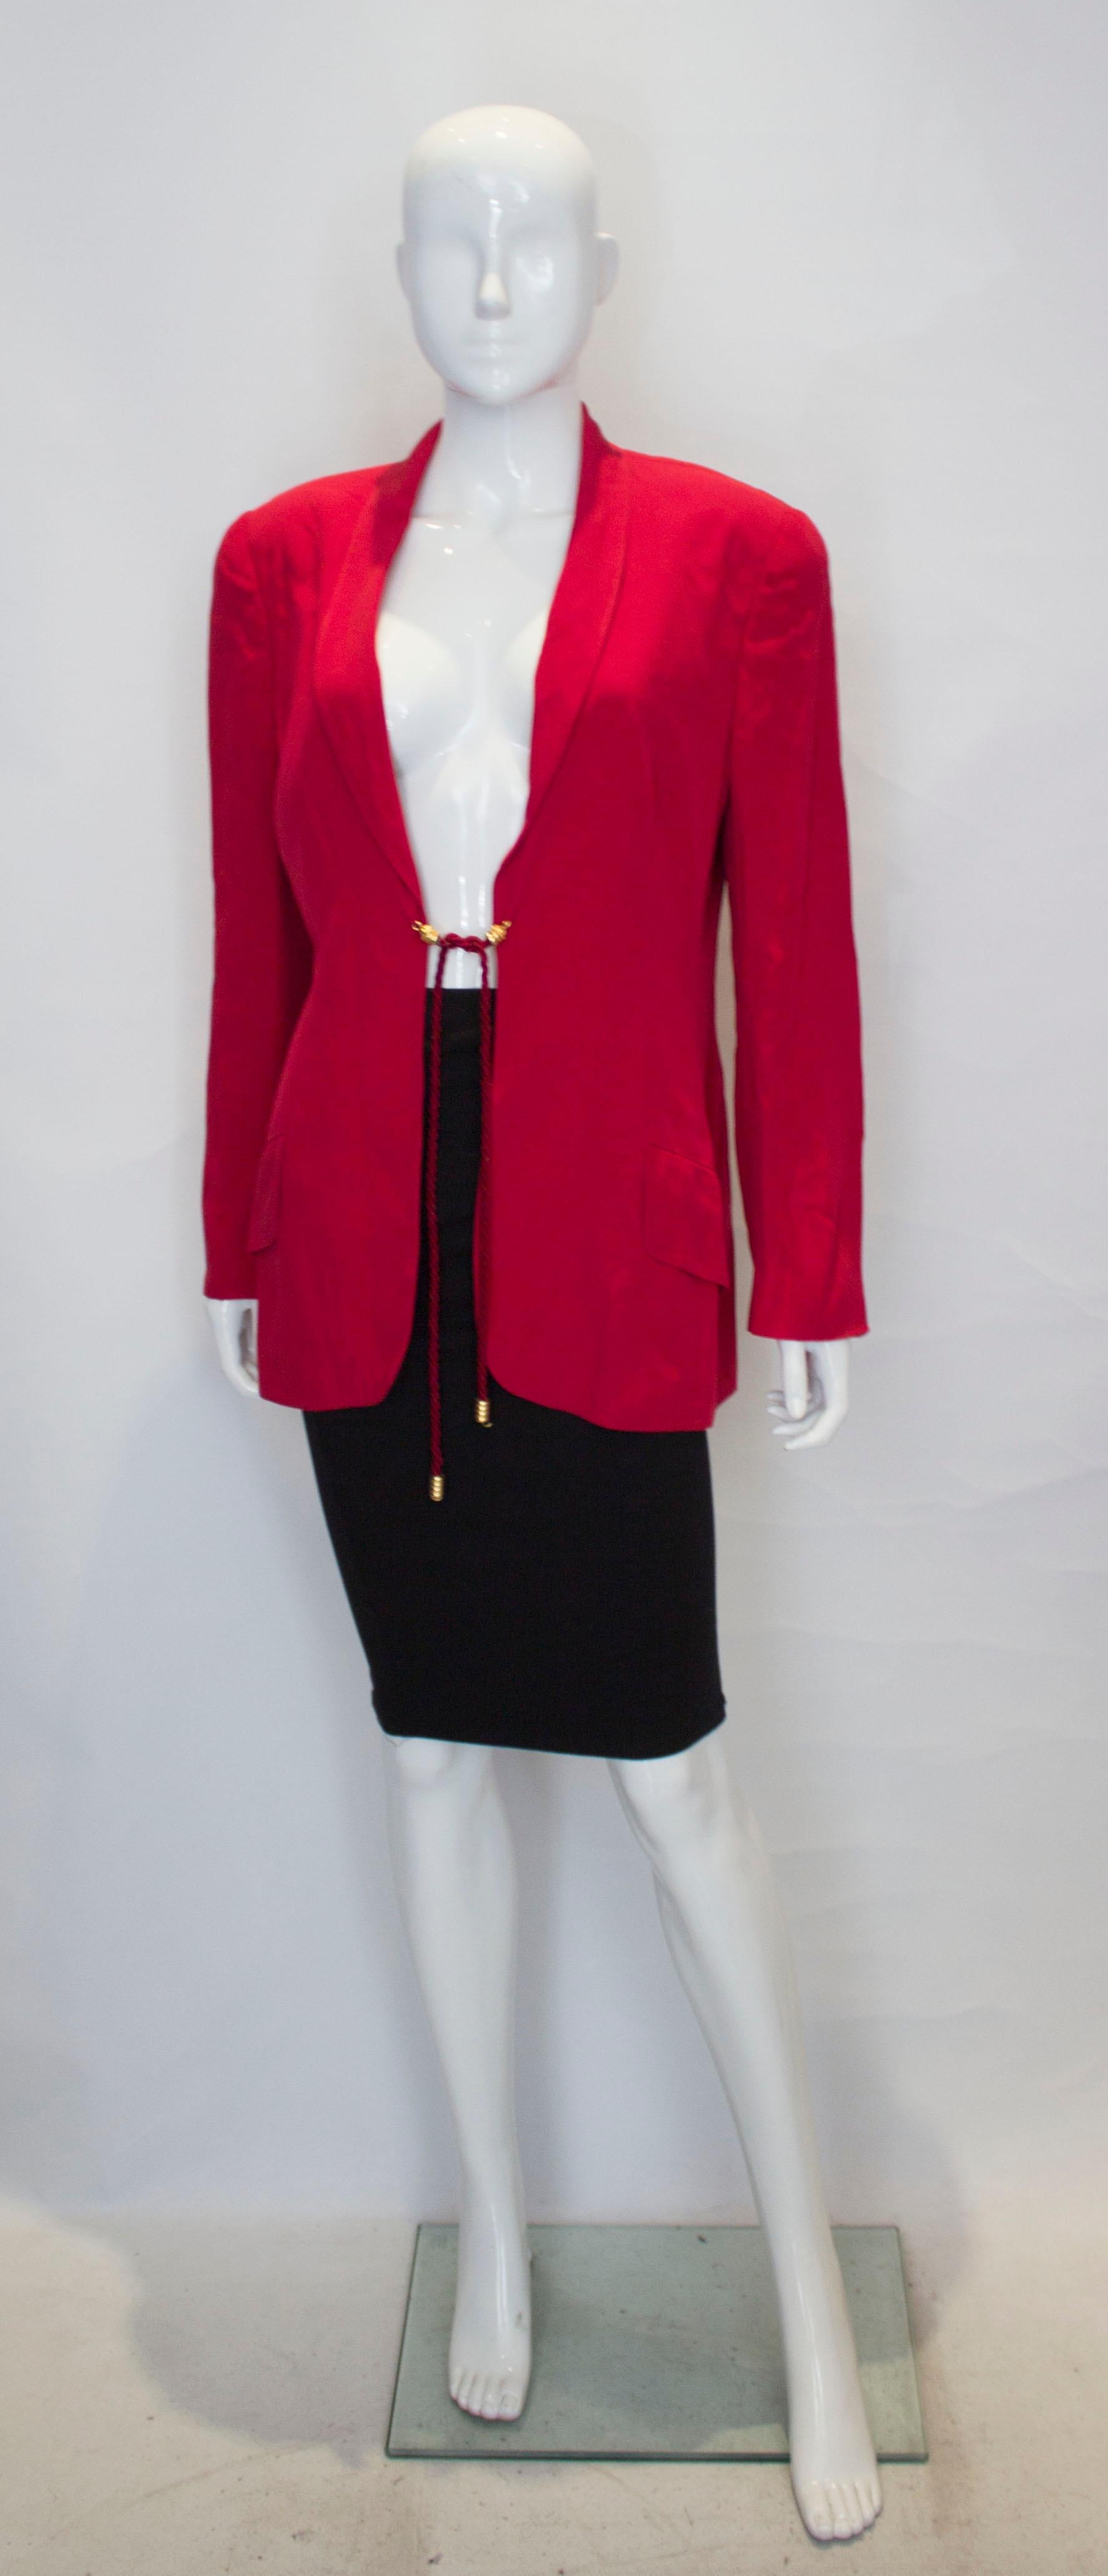  A headturning vintage red jacket by Mimmina . The jacket has a shawl collar , two flap pockets  and fastens with a rope tie.